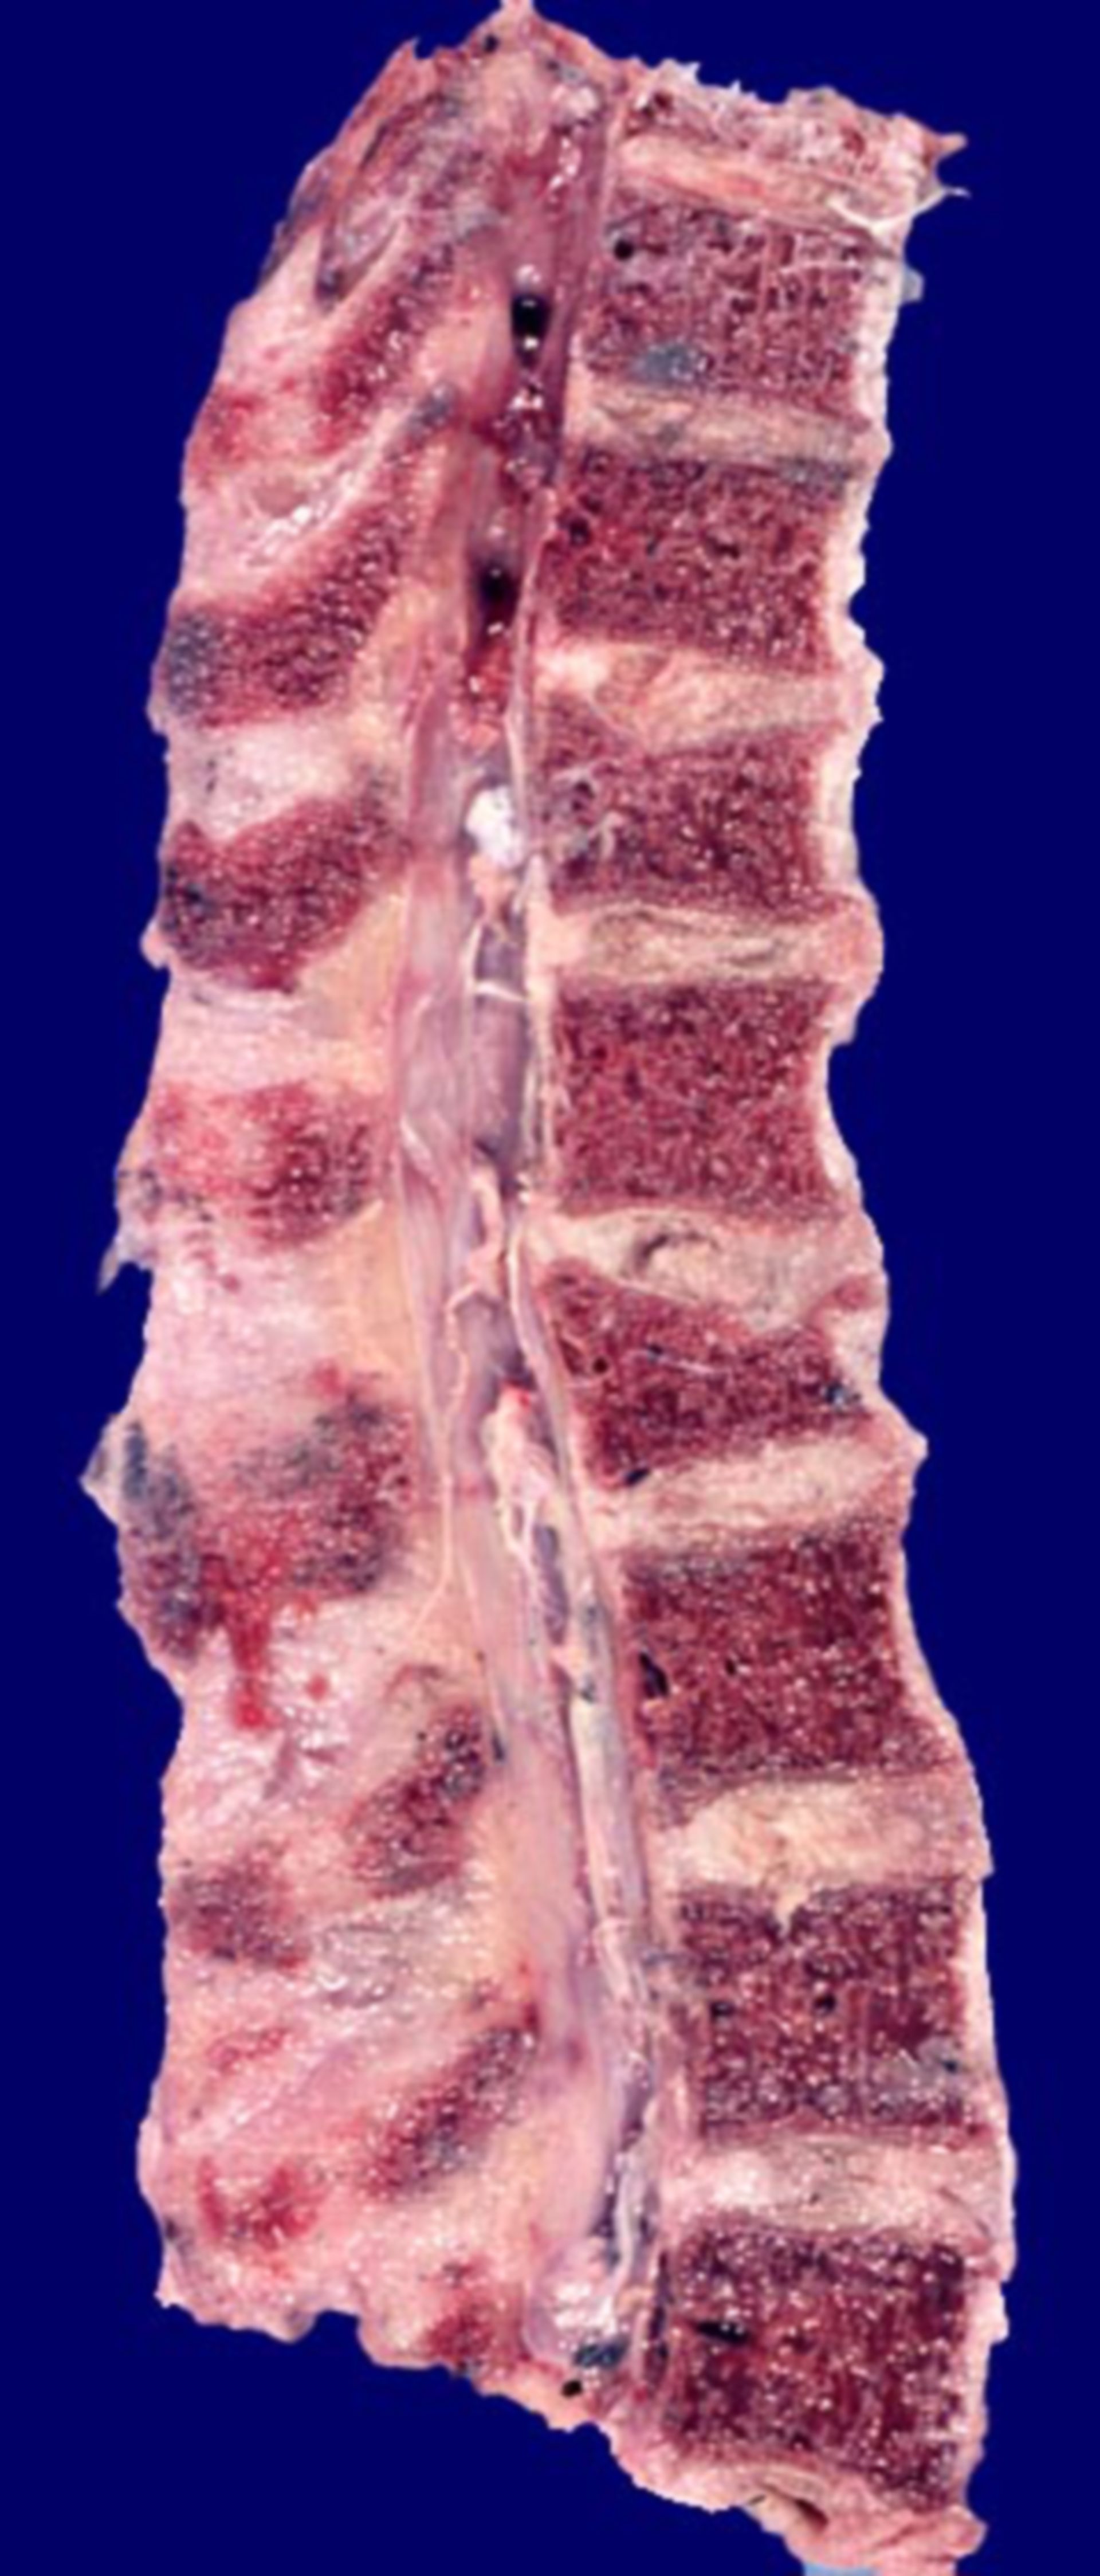 Compression fracture of vertebral body due to osteoporosis